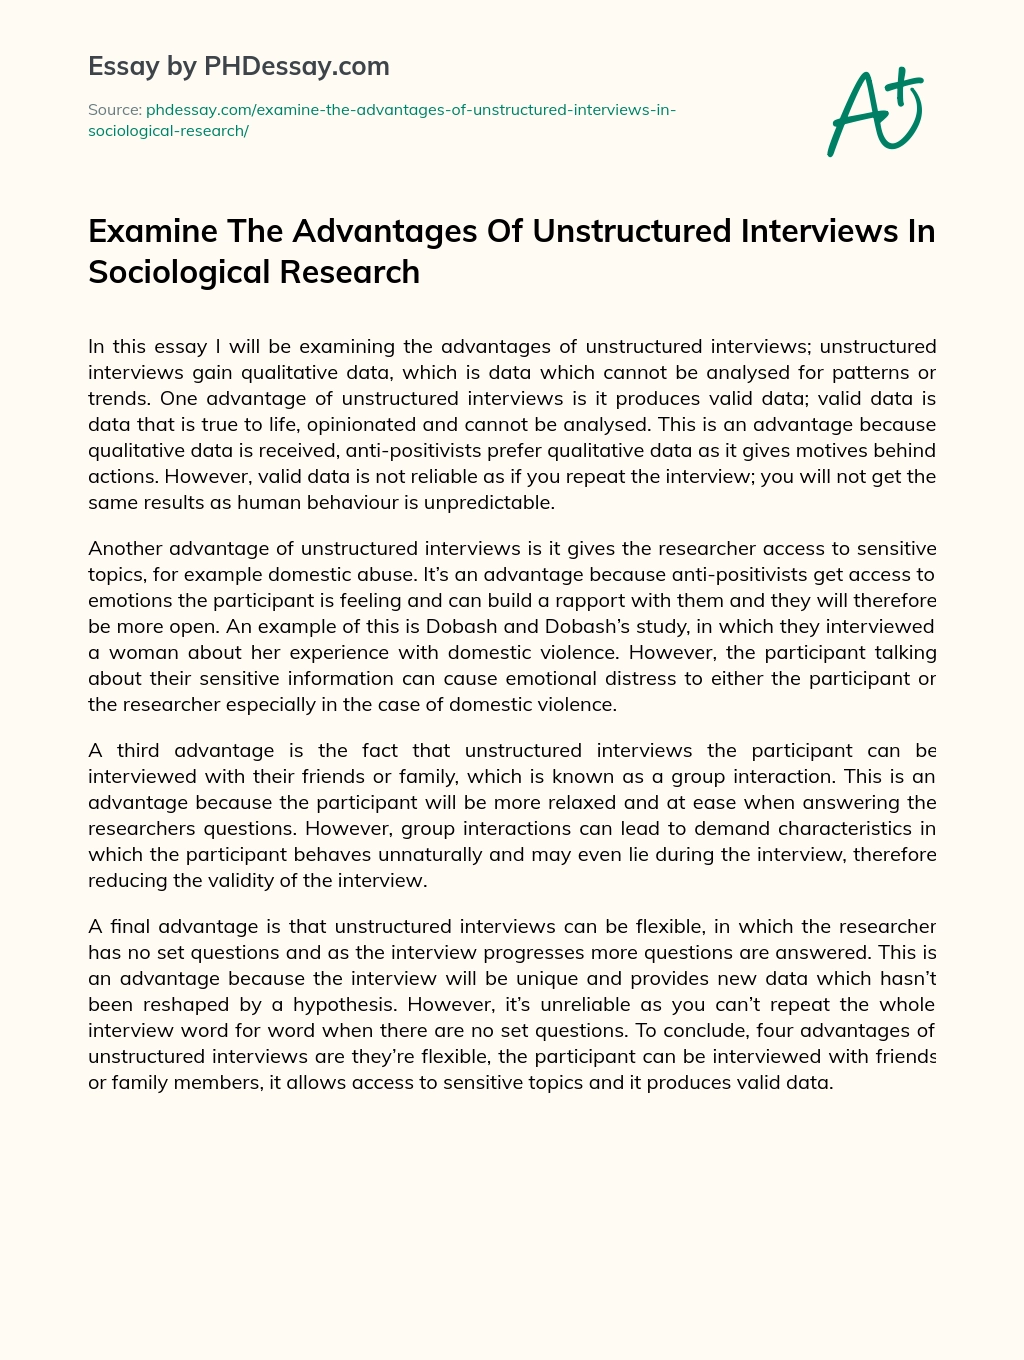 Advantages of Unstructured Interviews: Validity and Access to Sensitive Topics essay